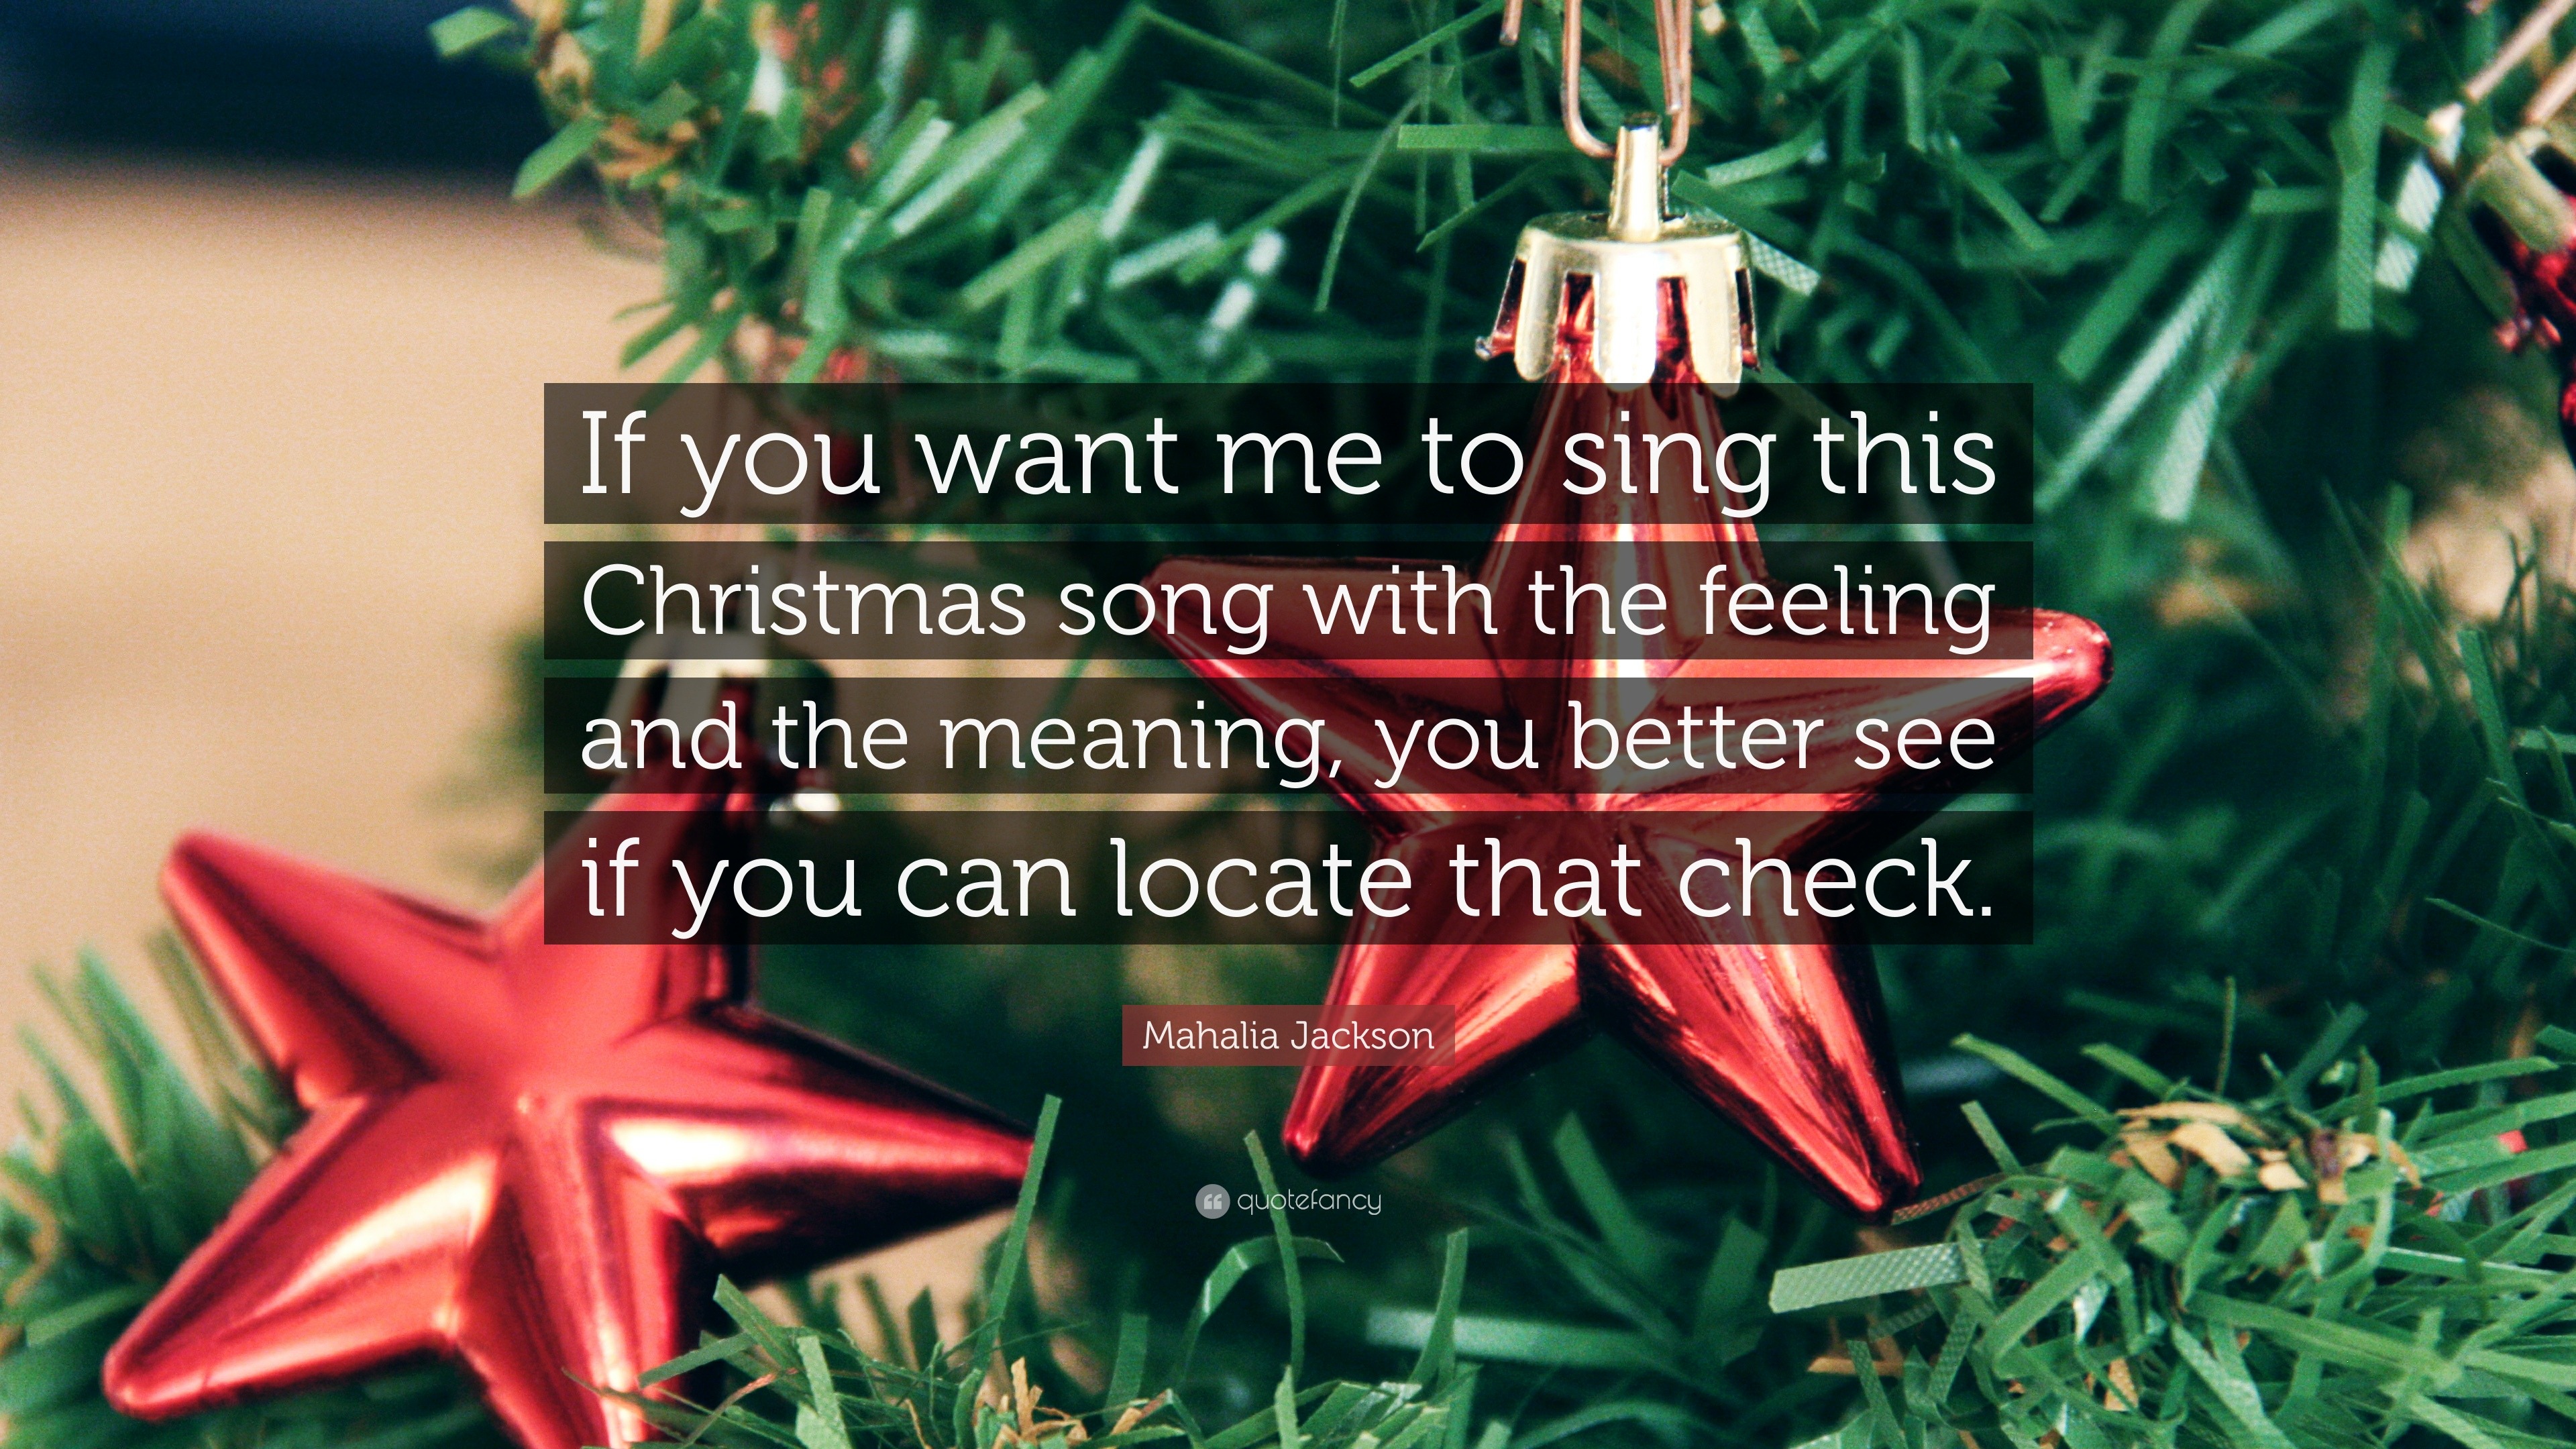 Mahalia Jackson Quote: “If you want me to sing this Christmas song with the feeling and the ...